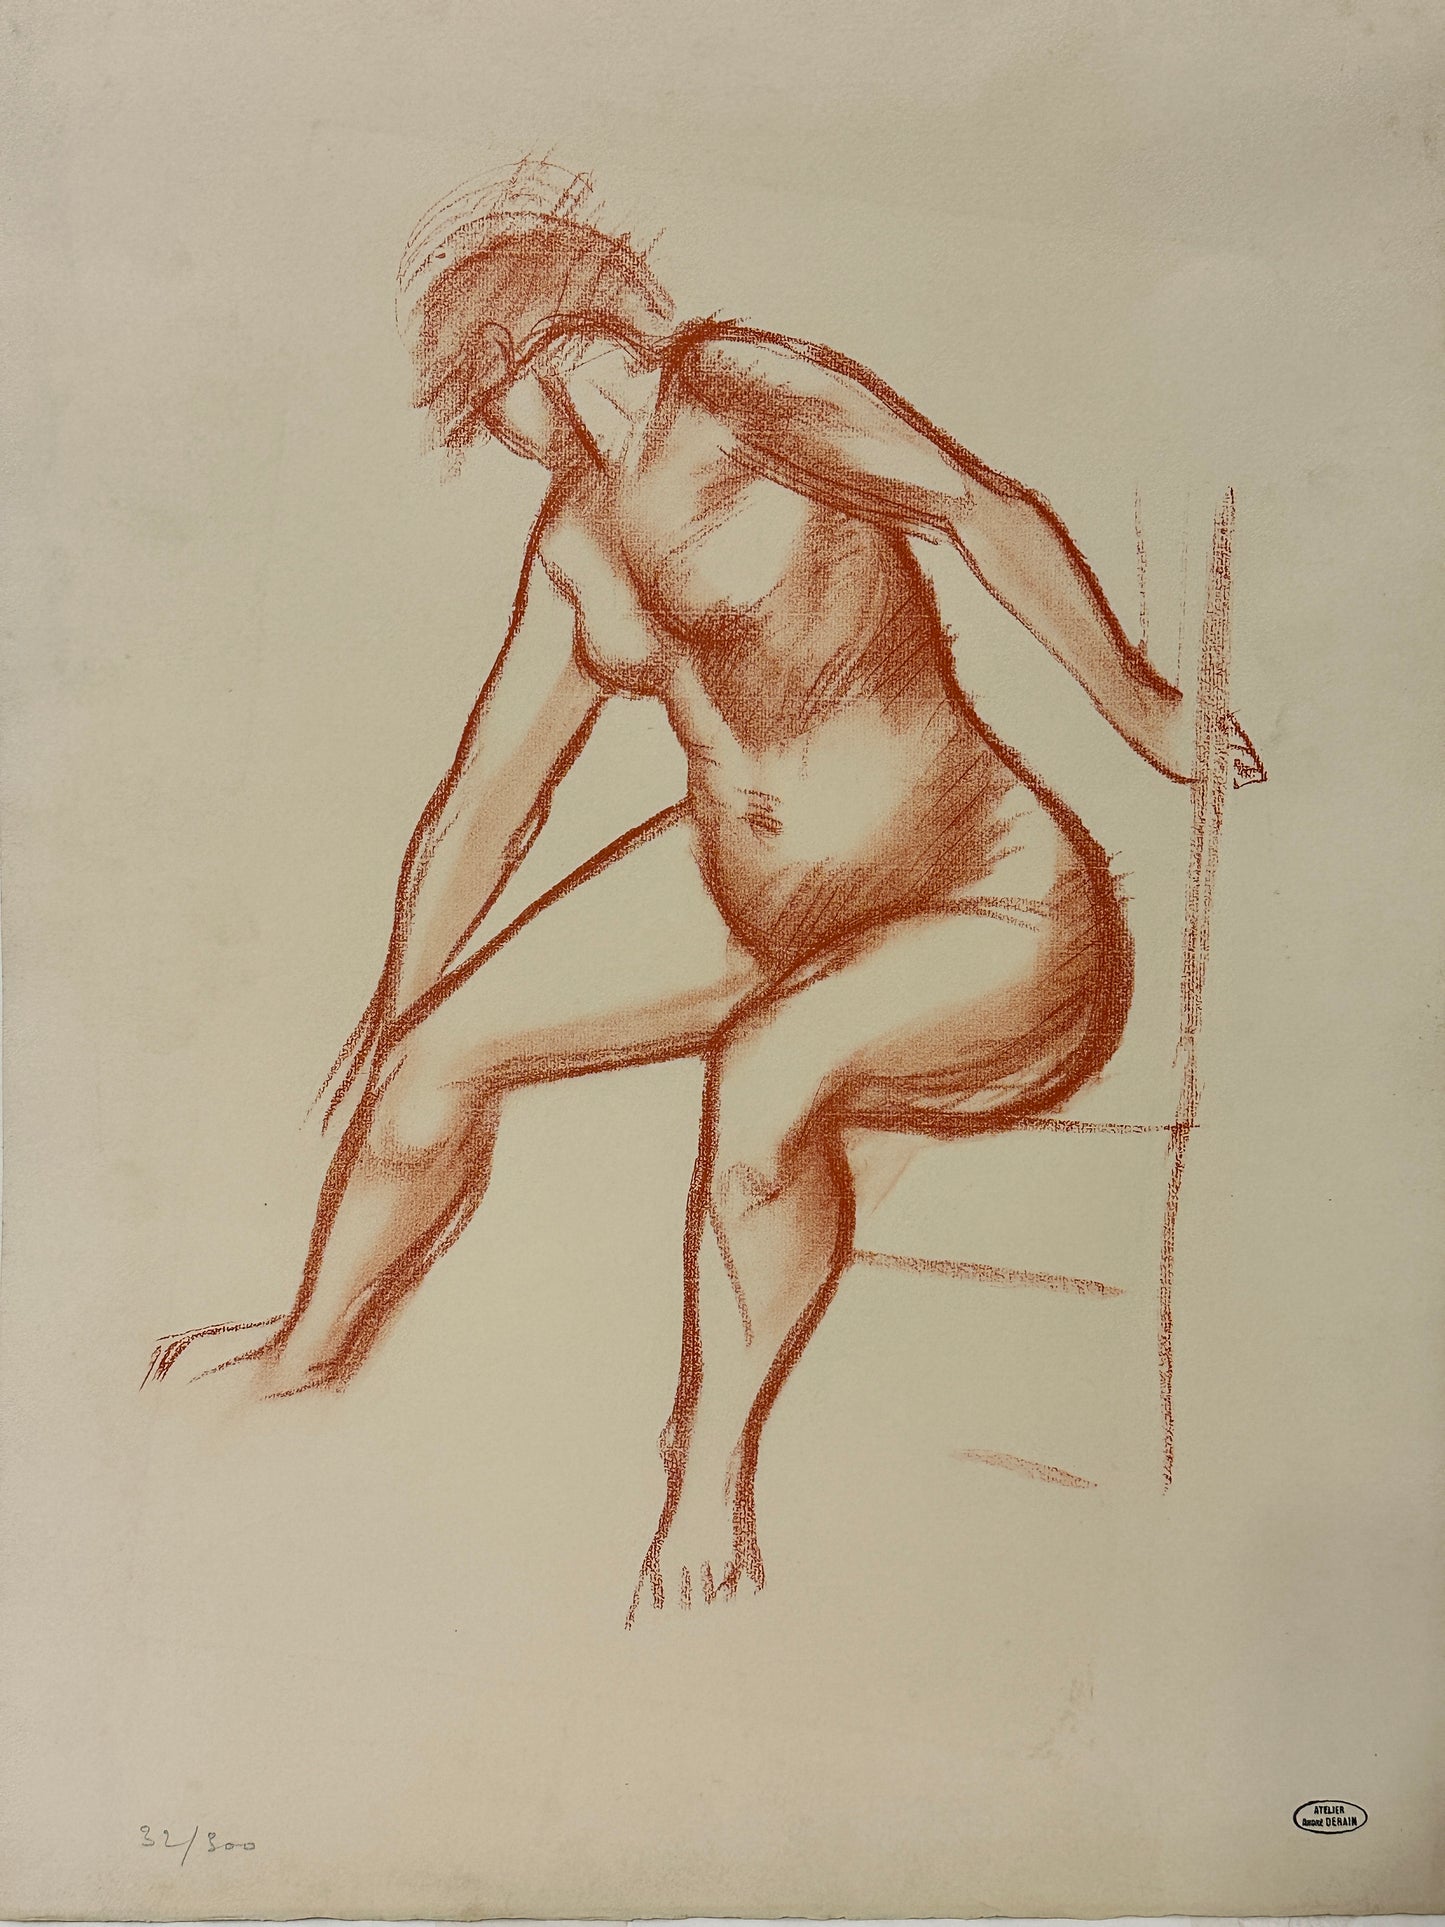 Andre Derain Lithograph: Seated Nude Woman Ed.32/300